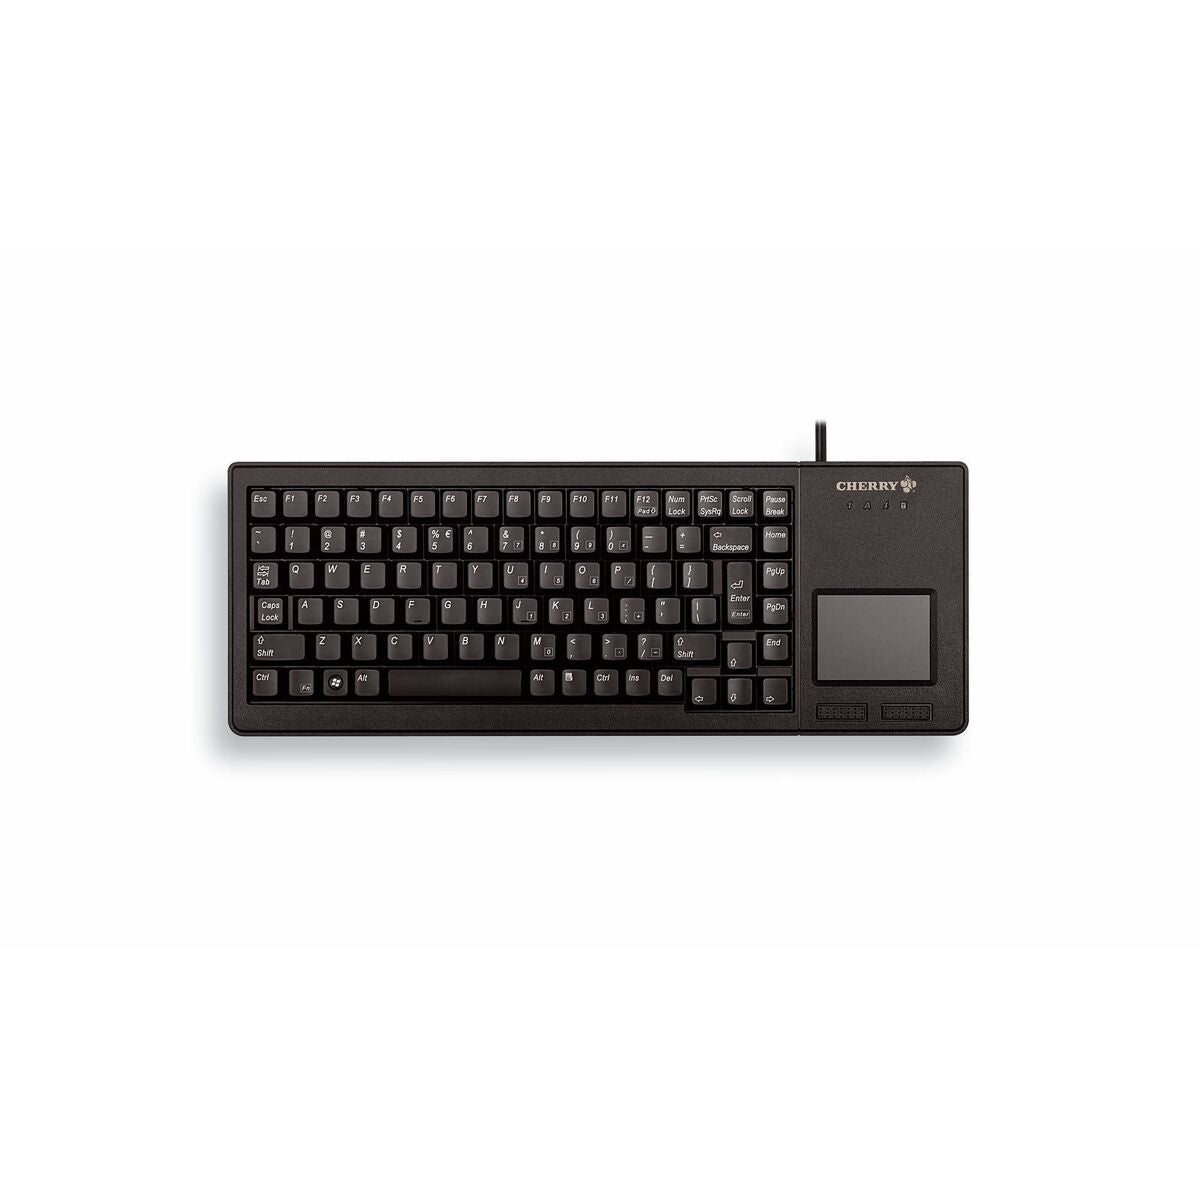 Keyboard Cherry XS Touchpad Keyboard Qwerty UK Grey, Cherry, Computing, Accessories, keyboard-cherry-xs-touchpad-keyboard-qwerty-uk-grey, Brand_Cherry, category-reference-2609, category-reference-2642, category-reference-2646, category-reference-t-19685, category-reference-t-19908, category-reference-t-21353, category-reference-t-25628, computers / peripherals, Condition_NEW, office, Price_100 - 200, Teleworking, RiotNook